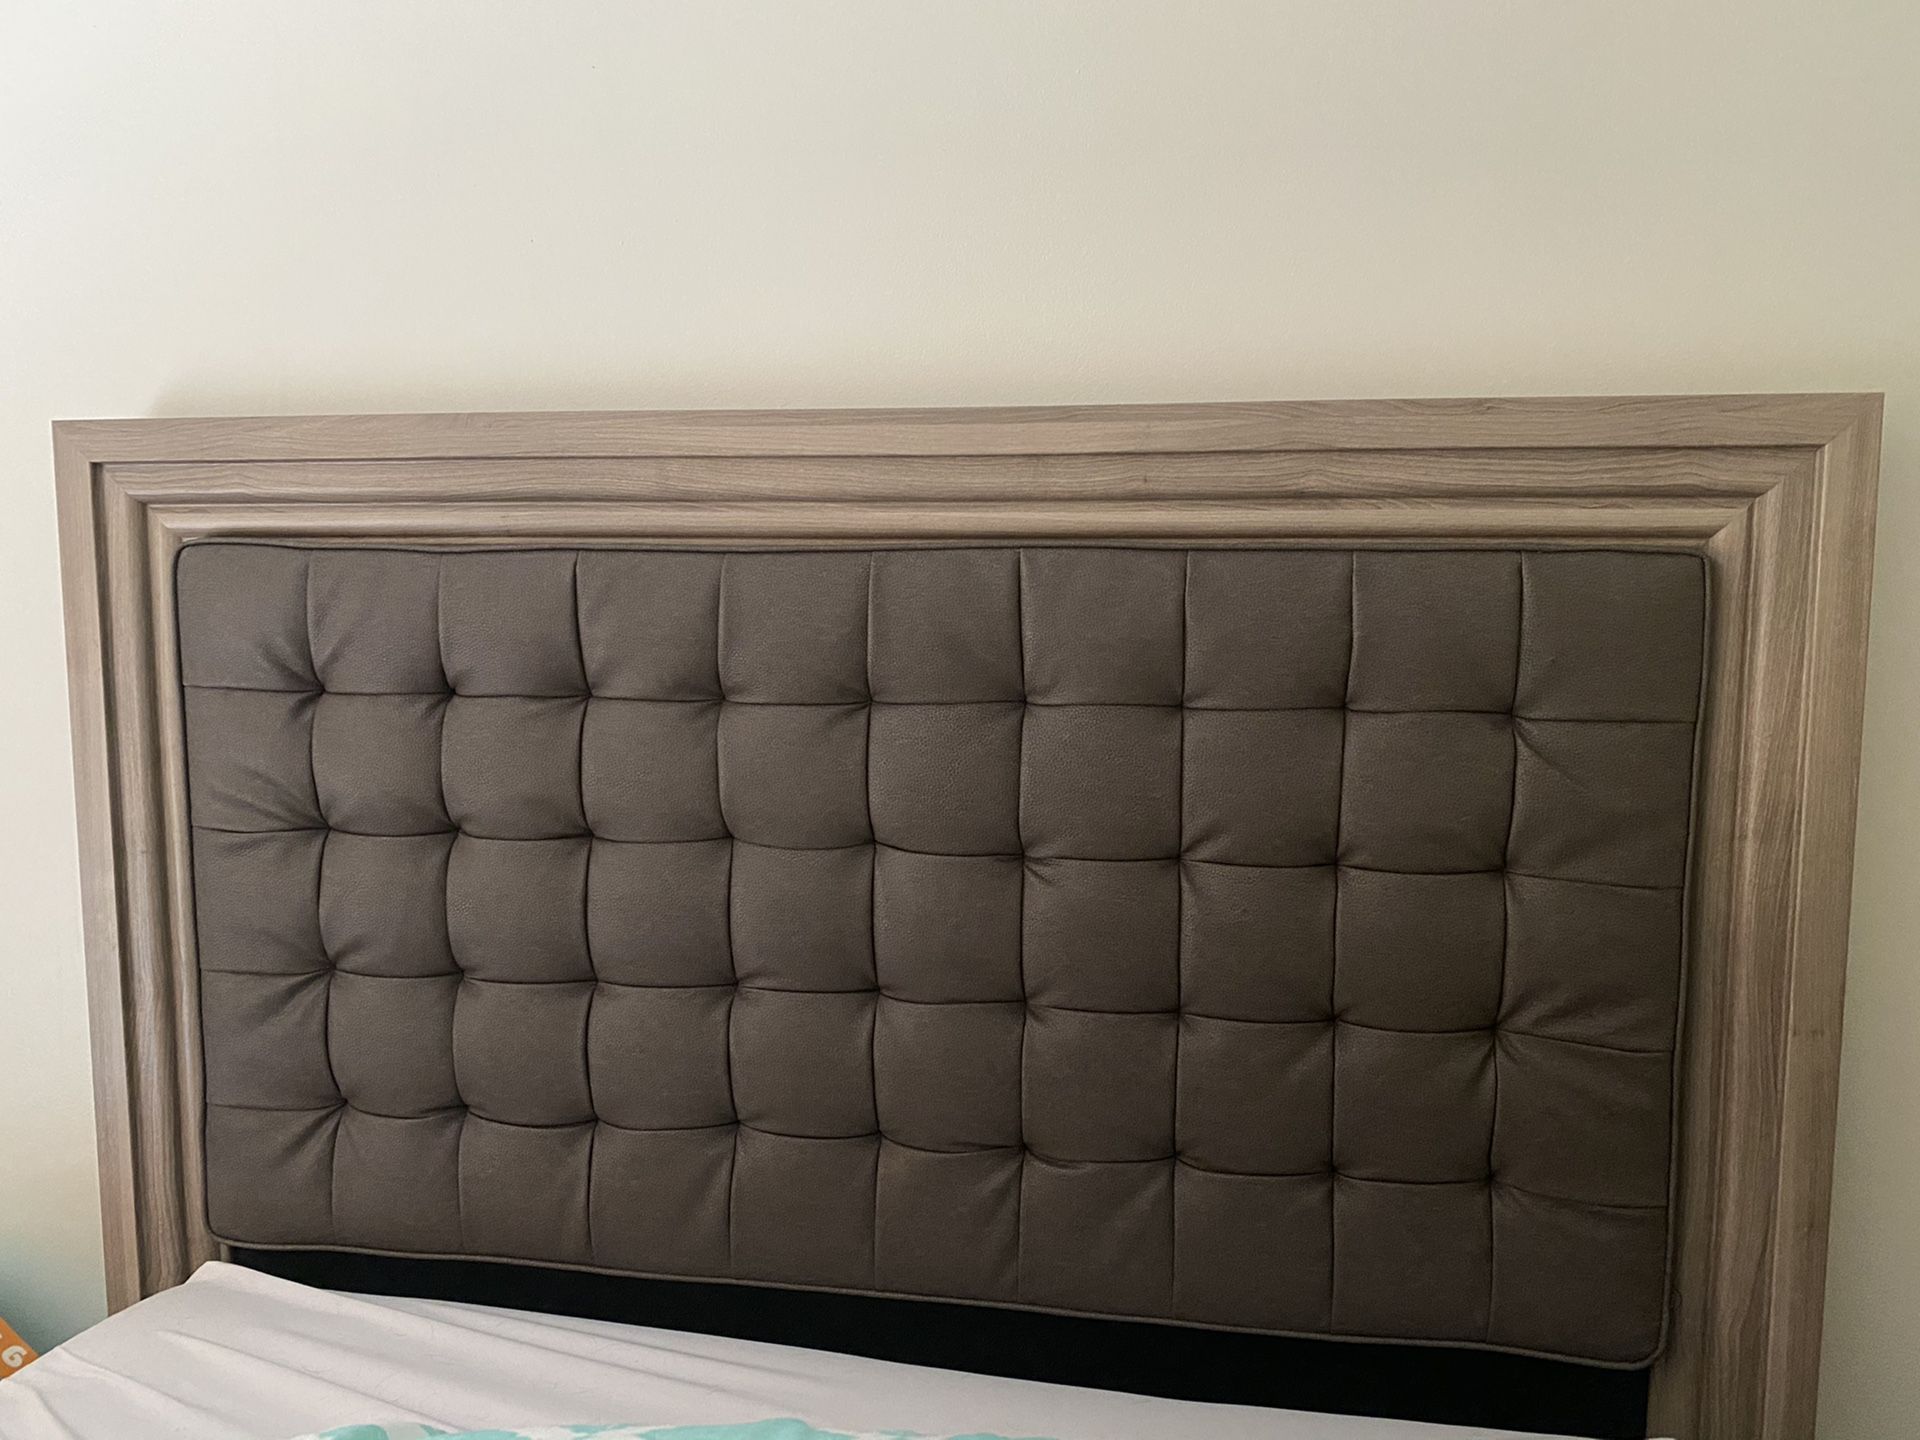 FULL bed frame and headboard